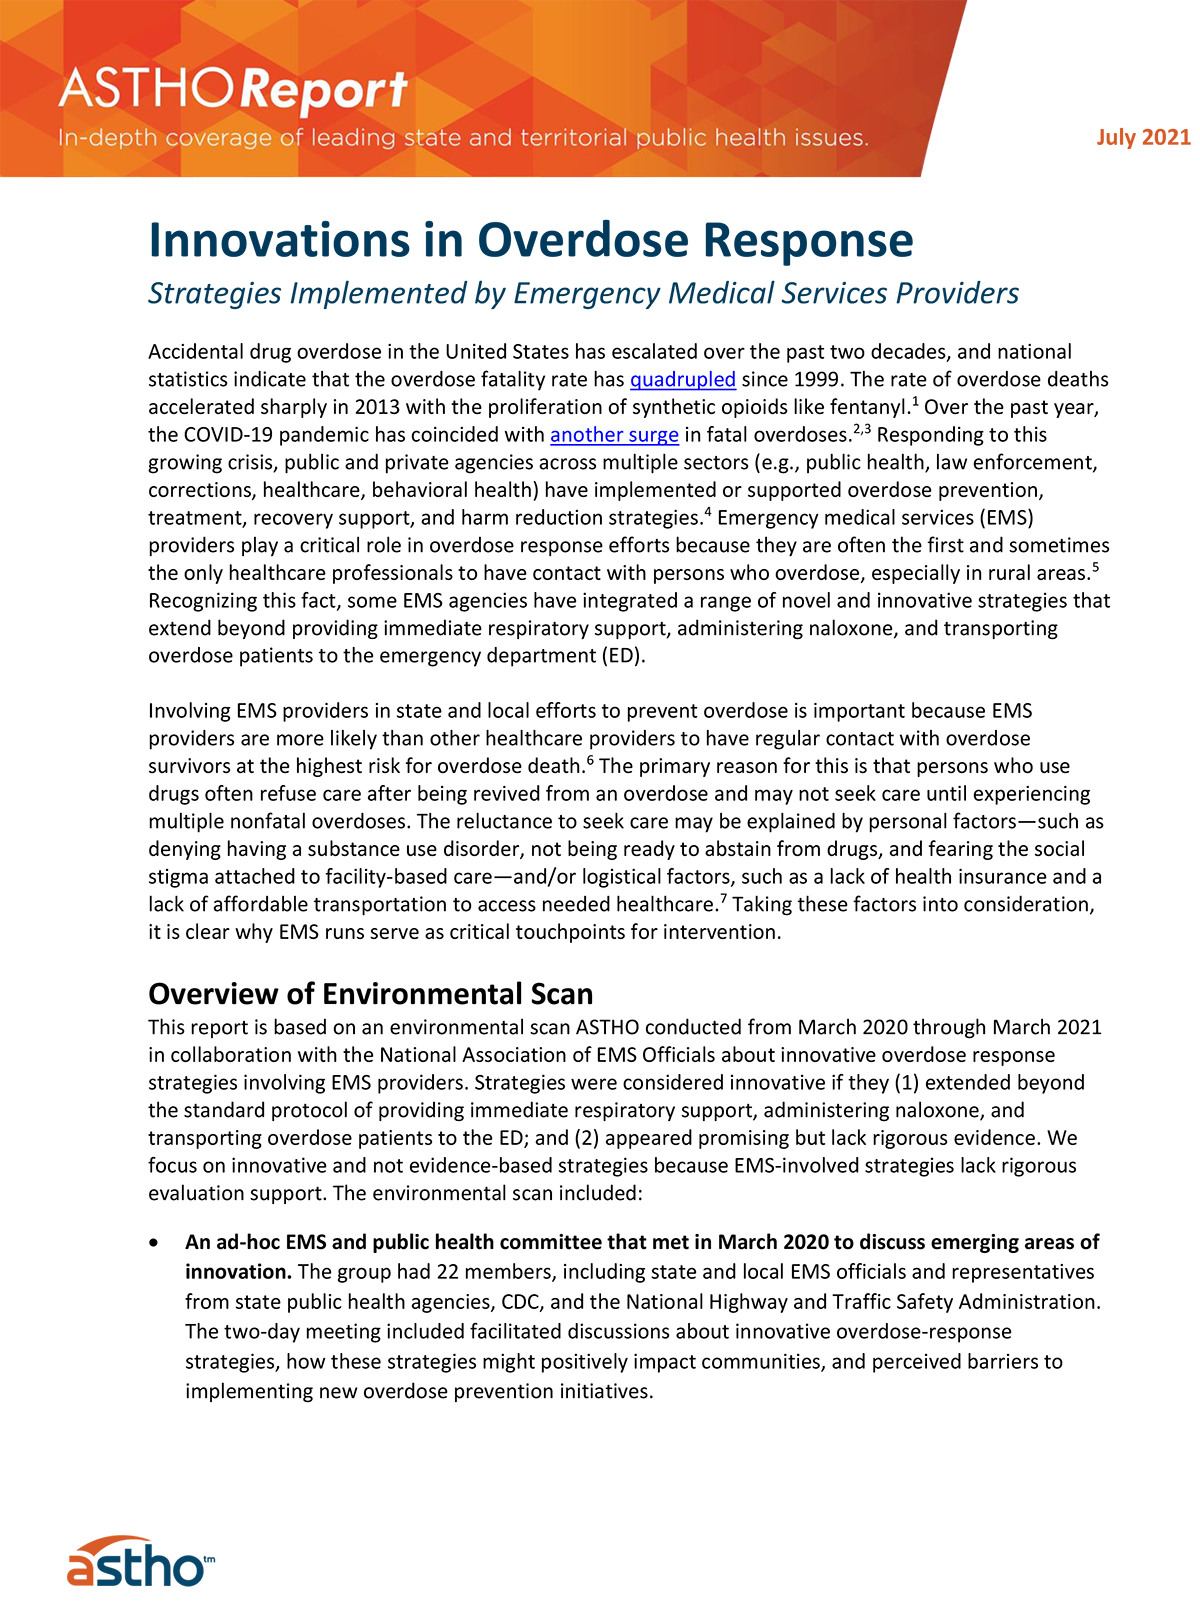 ASTHOReport: Innovations in Overdose Response: Strategies Implemented by Emergency Medical Services Providers